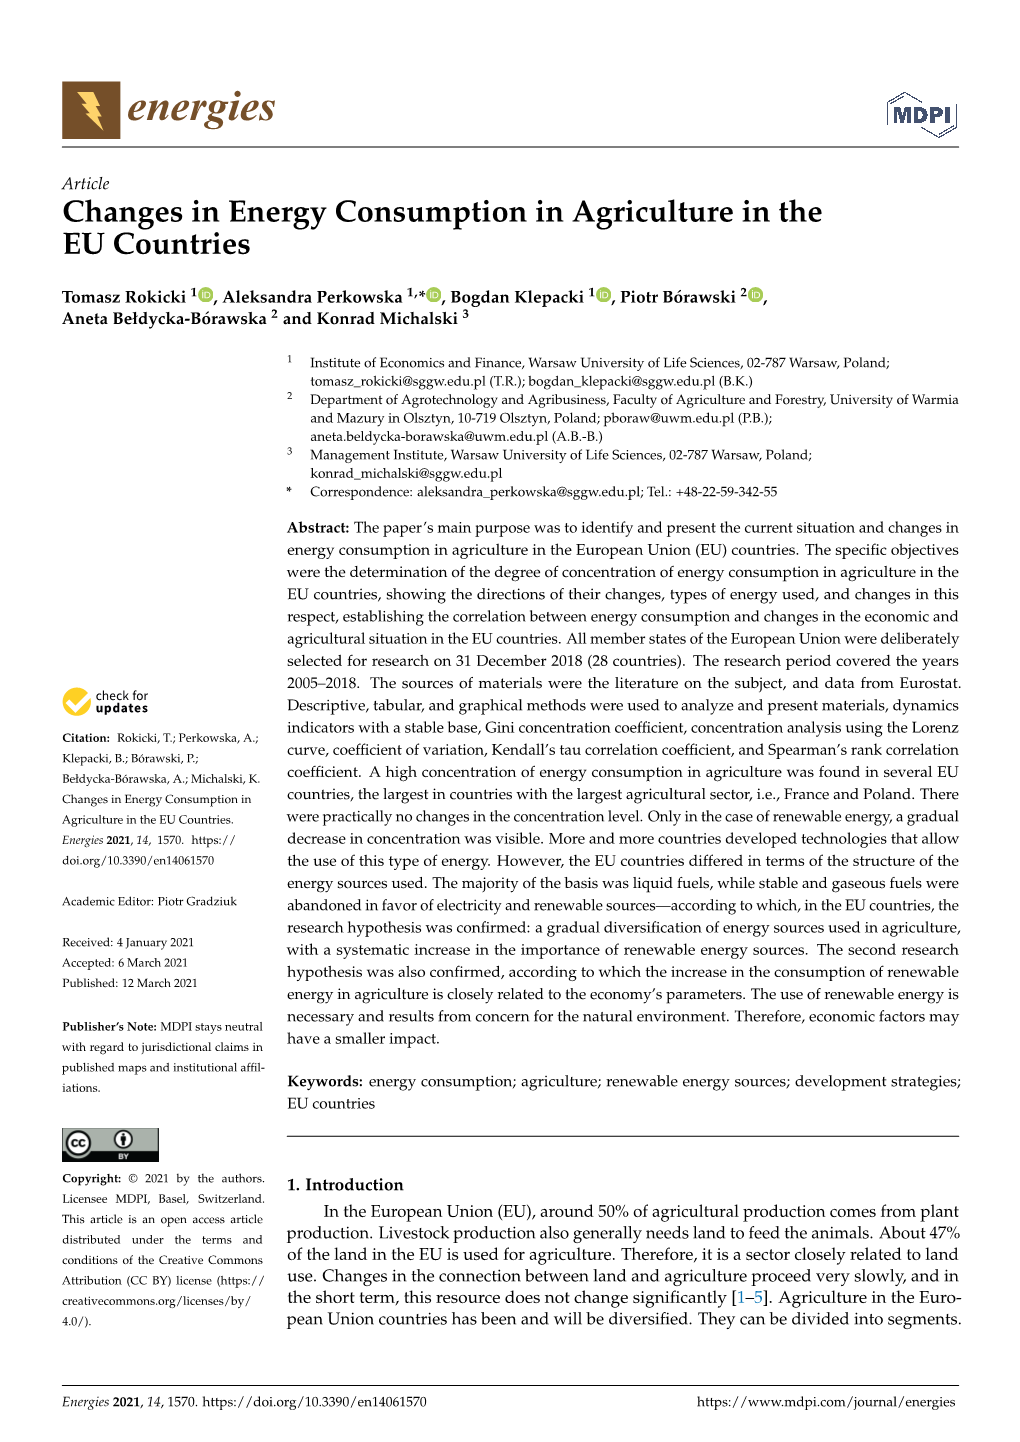 Changes in Energy Consumption in Agriculture in the EU Countries